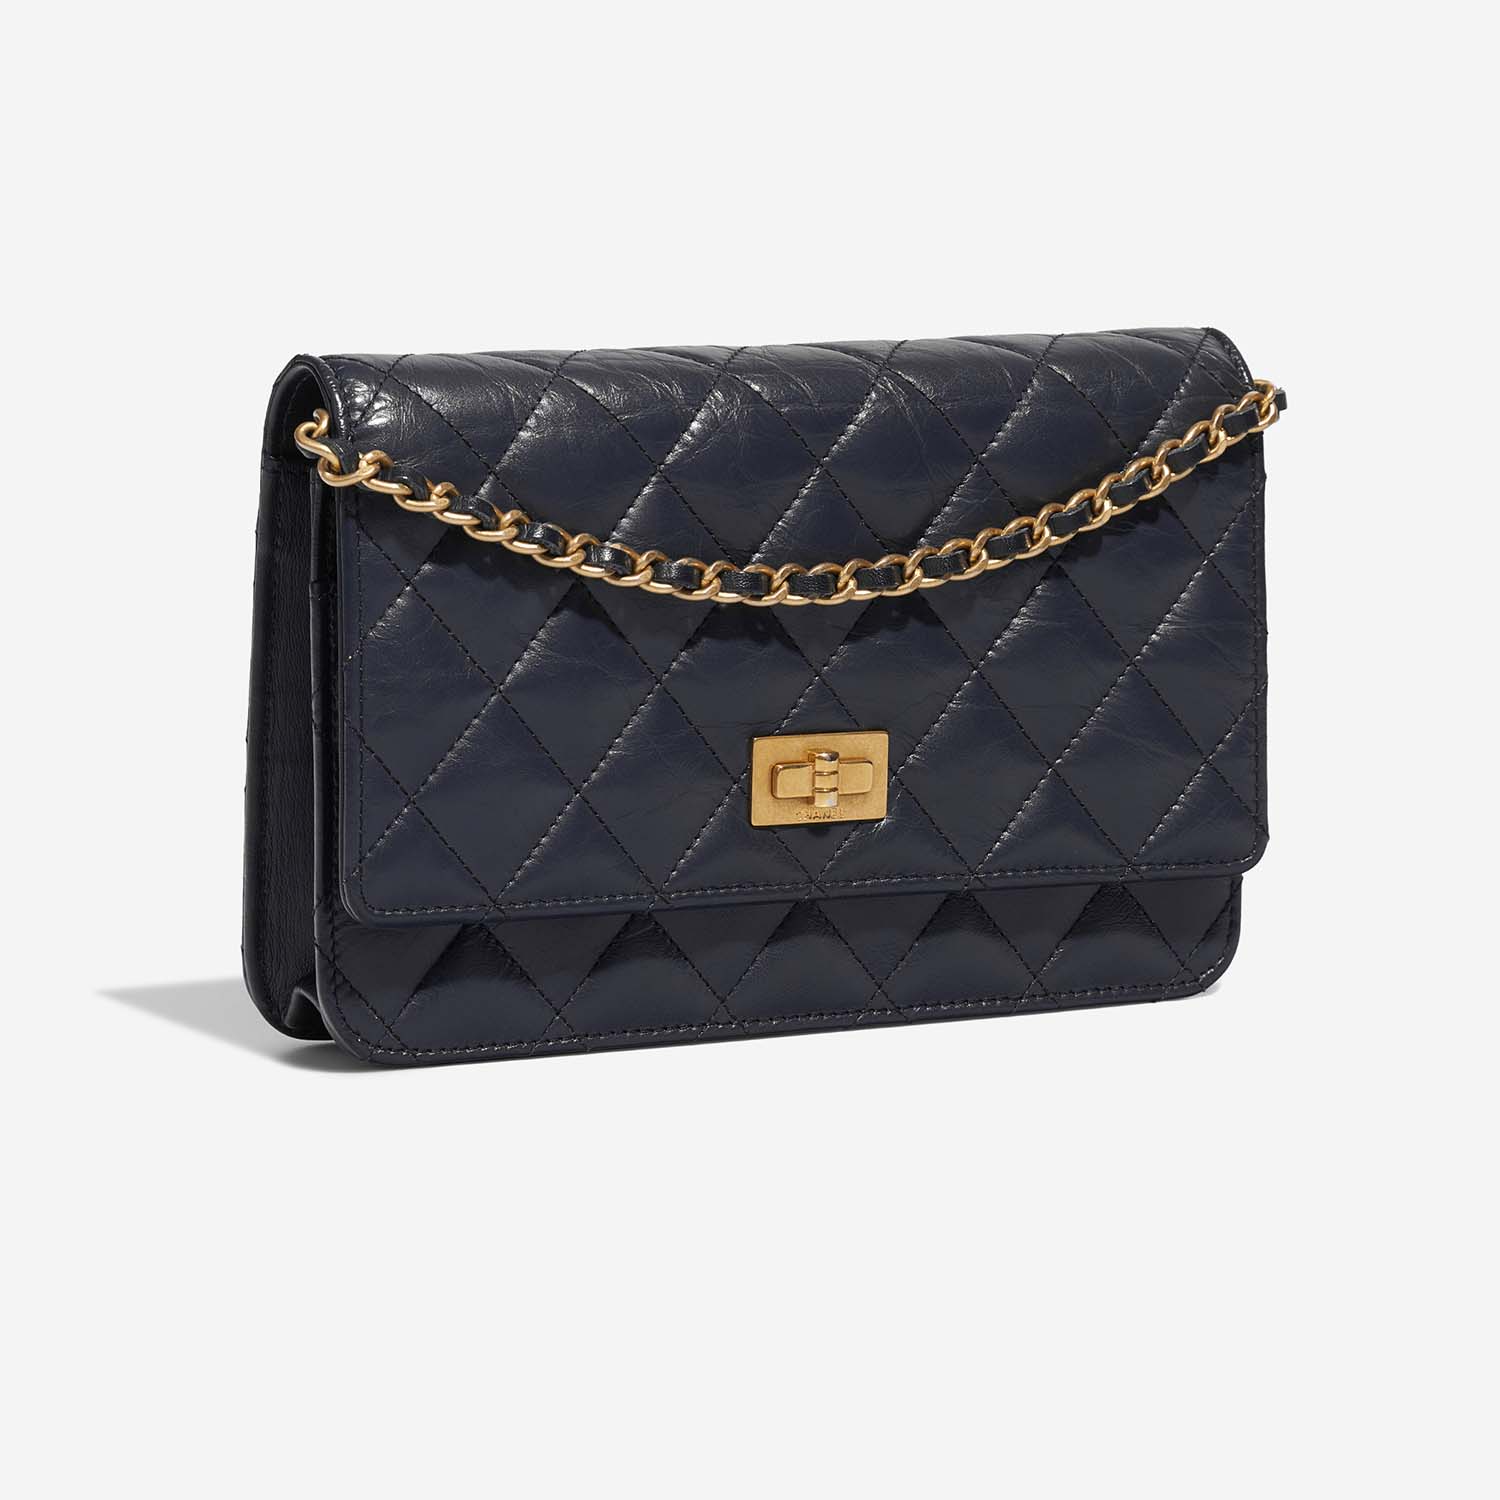 Pre-owned Chanel bag 2.55 Reissue Wallet On Chain Lamb Dark Blue Blue | Sell your designer bag on Saclab.com